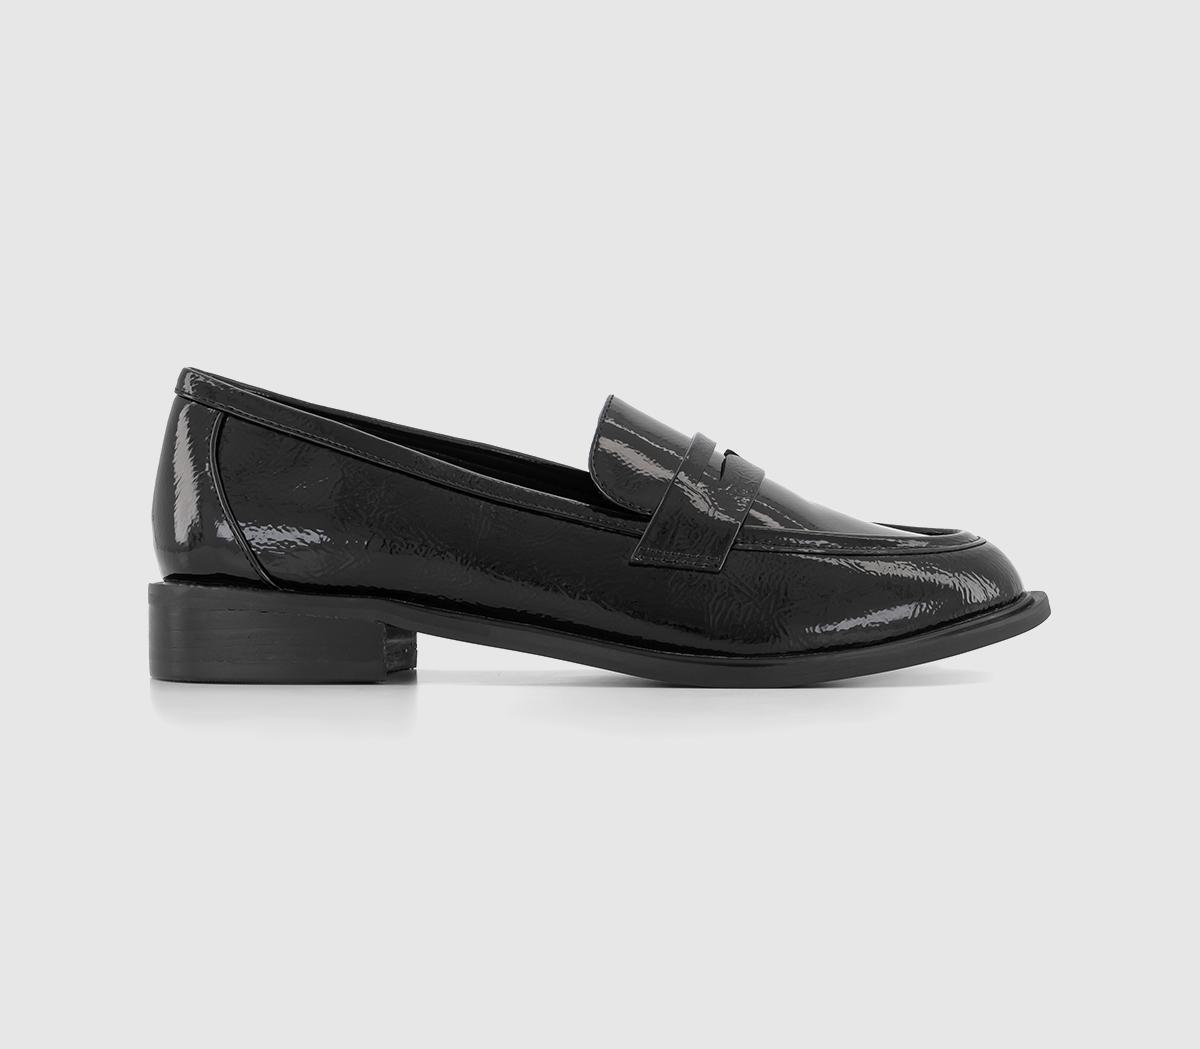 OFFICEFlaming Penny LoafersBlack Patent